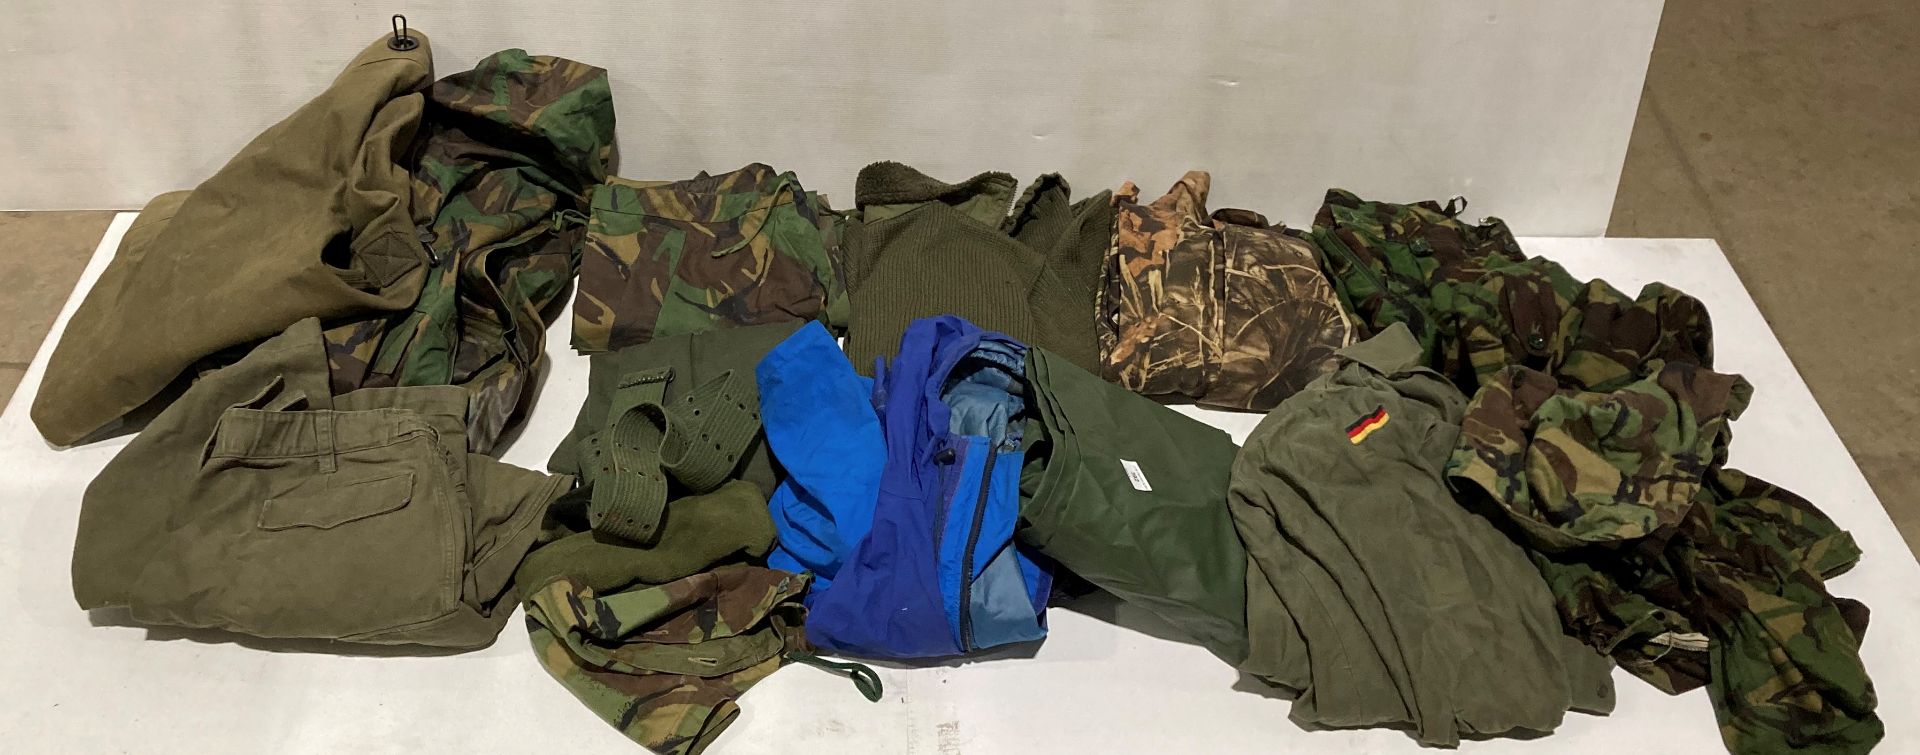 15 assorted military clothing items including kit bag combat DPM trousers (76/96/112) and smock